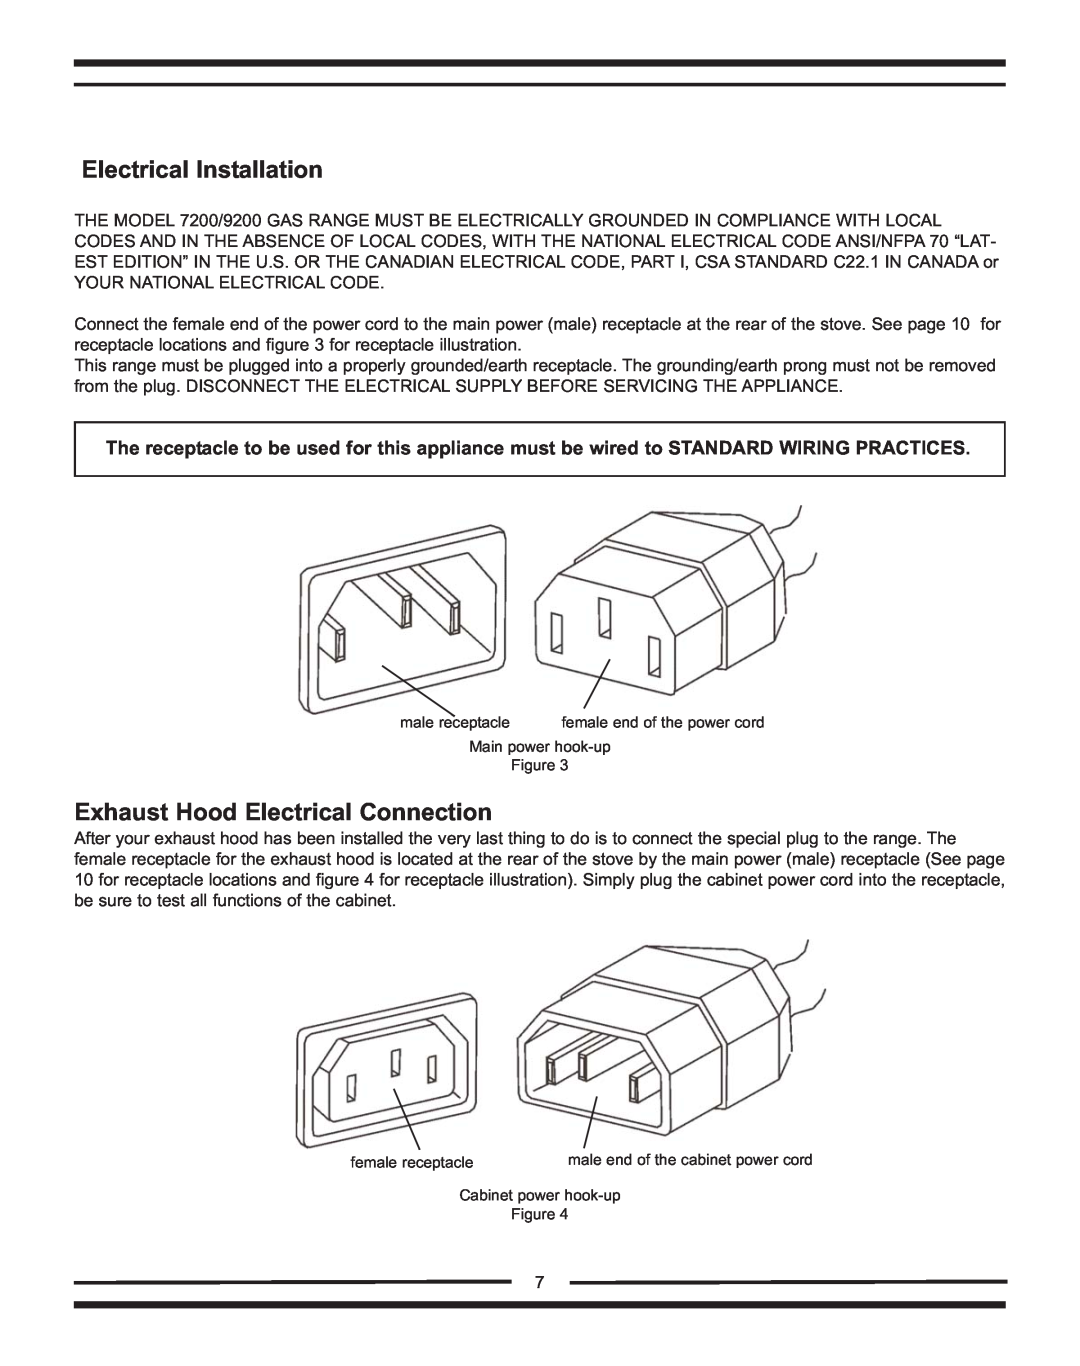 Heartland Bakeware 9200/7200 manual Electrical Installation, Exhaust Hood Electrical Connection 